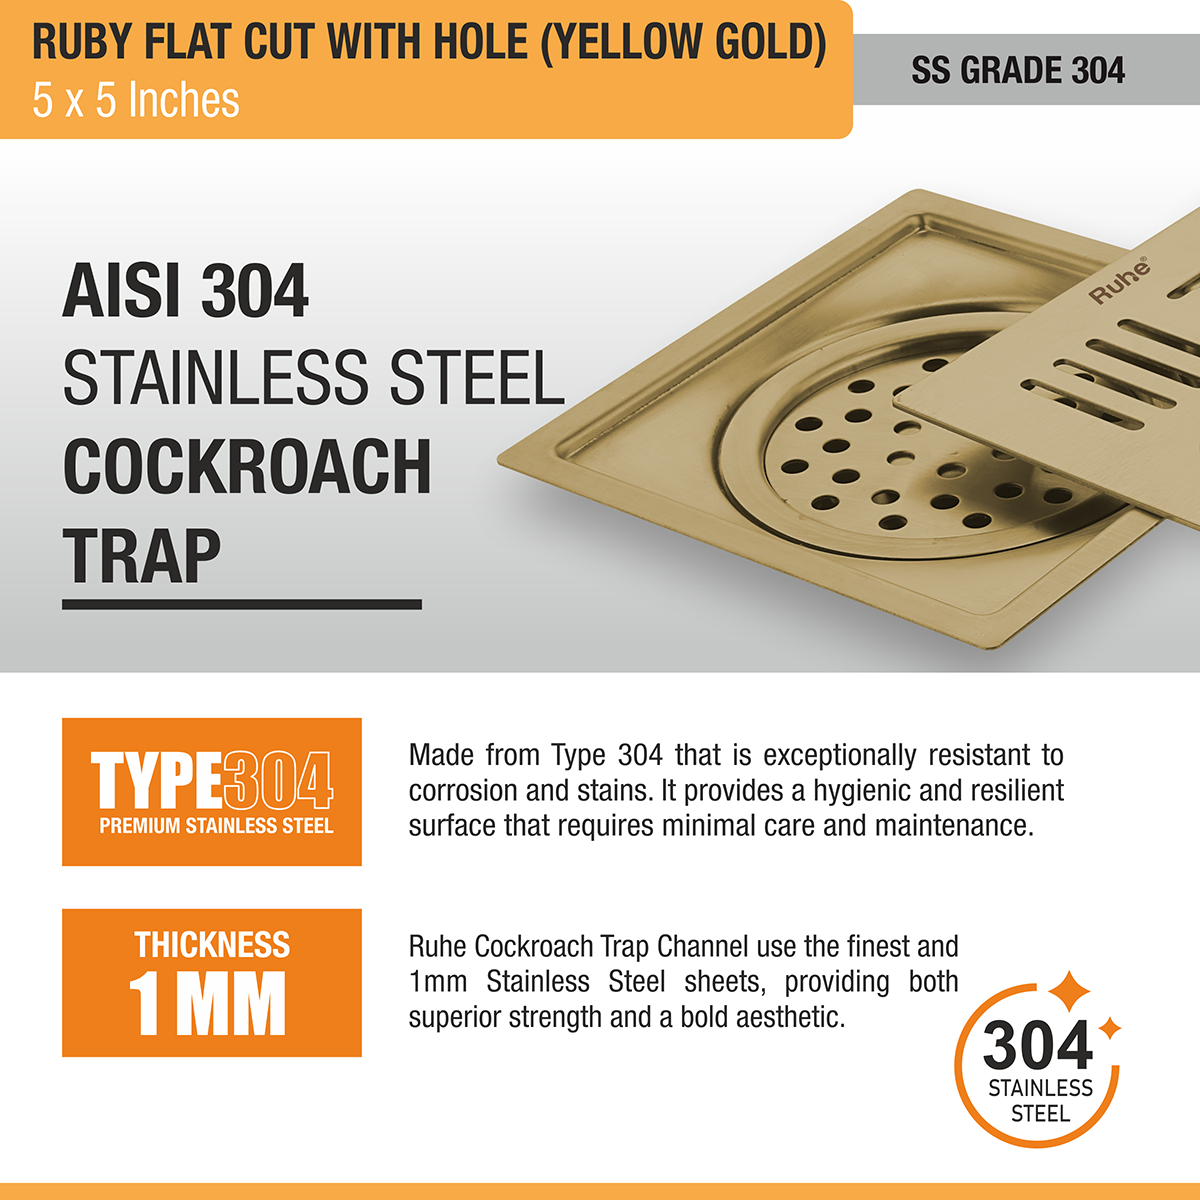 Ruby Square Flat Cut Floor Drain in Yellow Gold PVD Coating (5 x 5 Inches) with Hole stainless steel